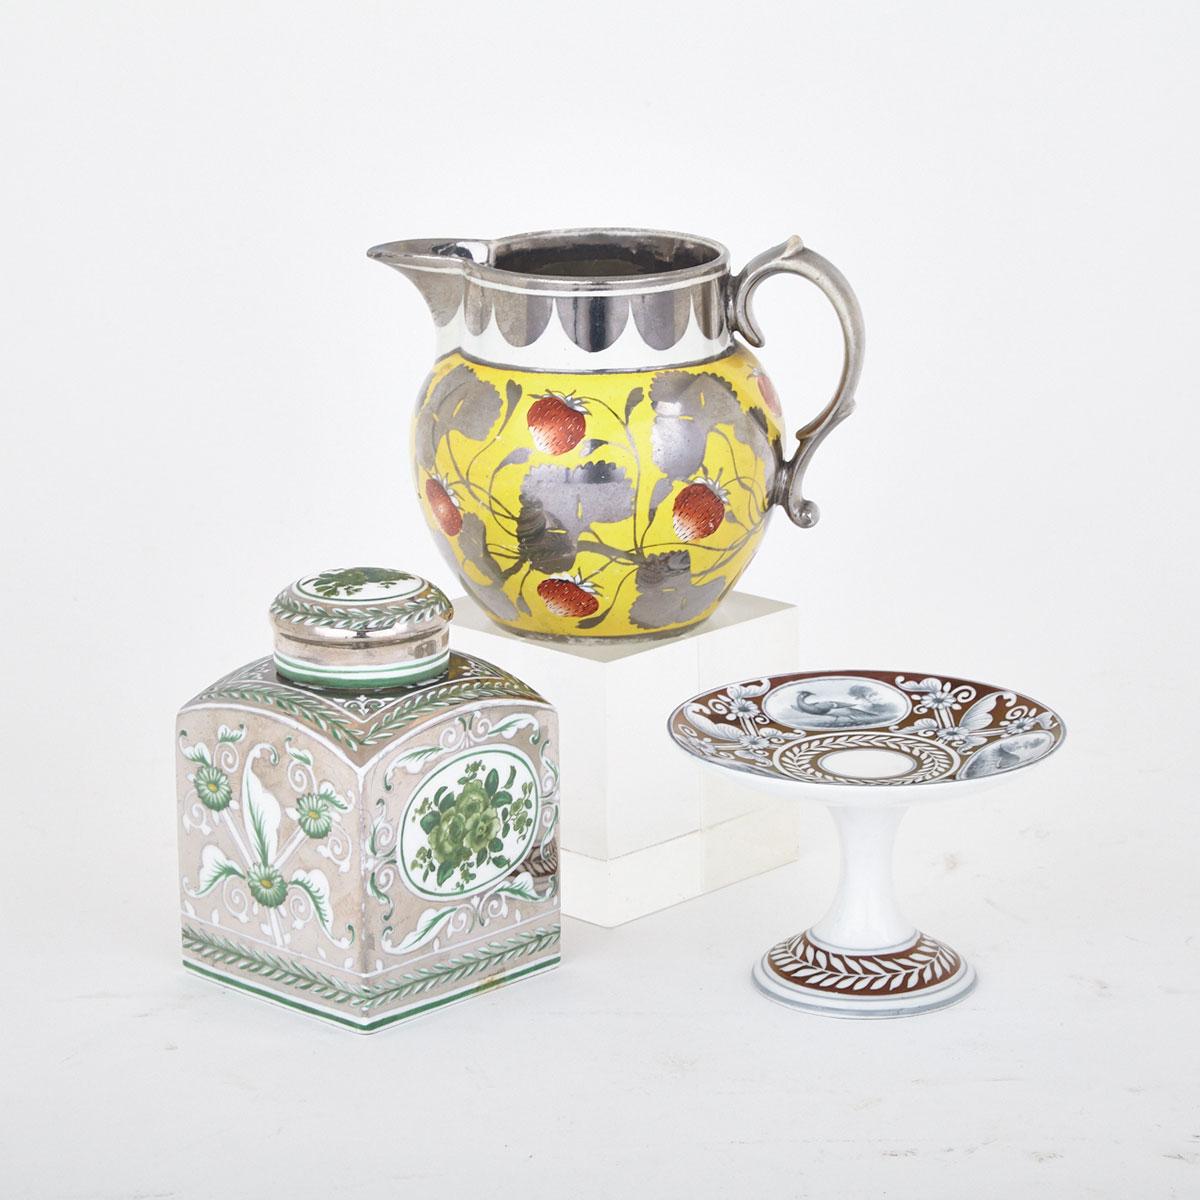 English Lustre Decorated Jug, Tea Caddy and a Small Comport, 19th/20th century